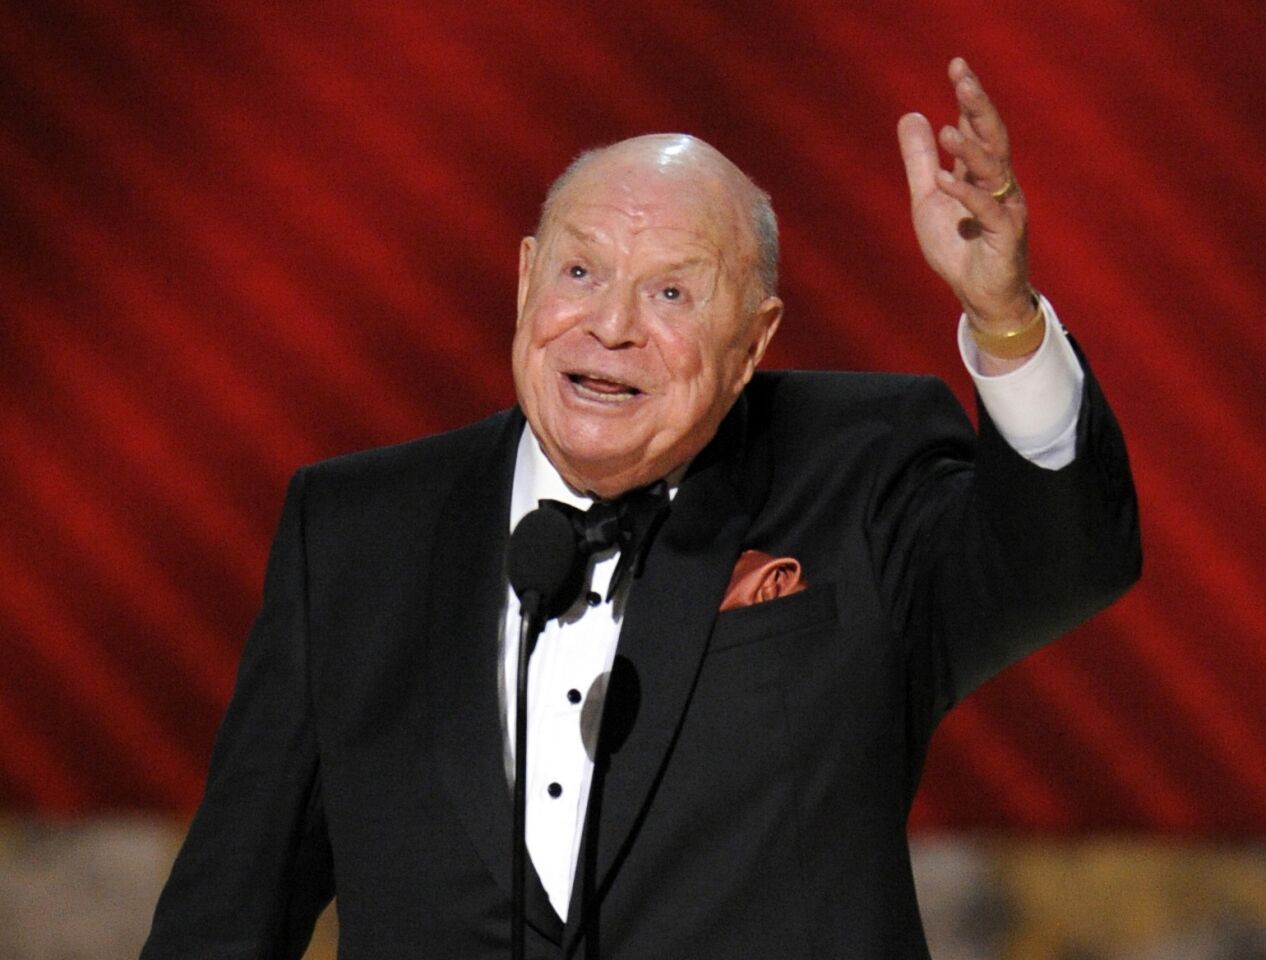 Rickles won an Emmy for performance in a variety or music program for "Mr. Warmth: The Don Rickles Project" at the 60th Primetime Emmy Awards in Los Angeles on Sept. 21, 2008.